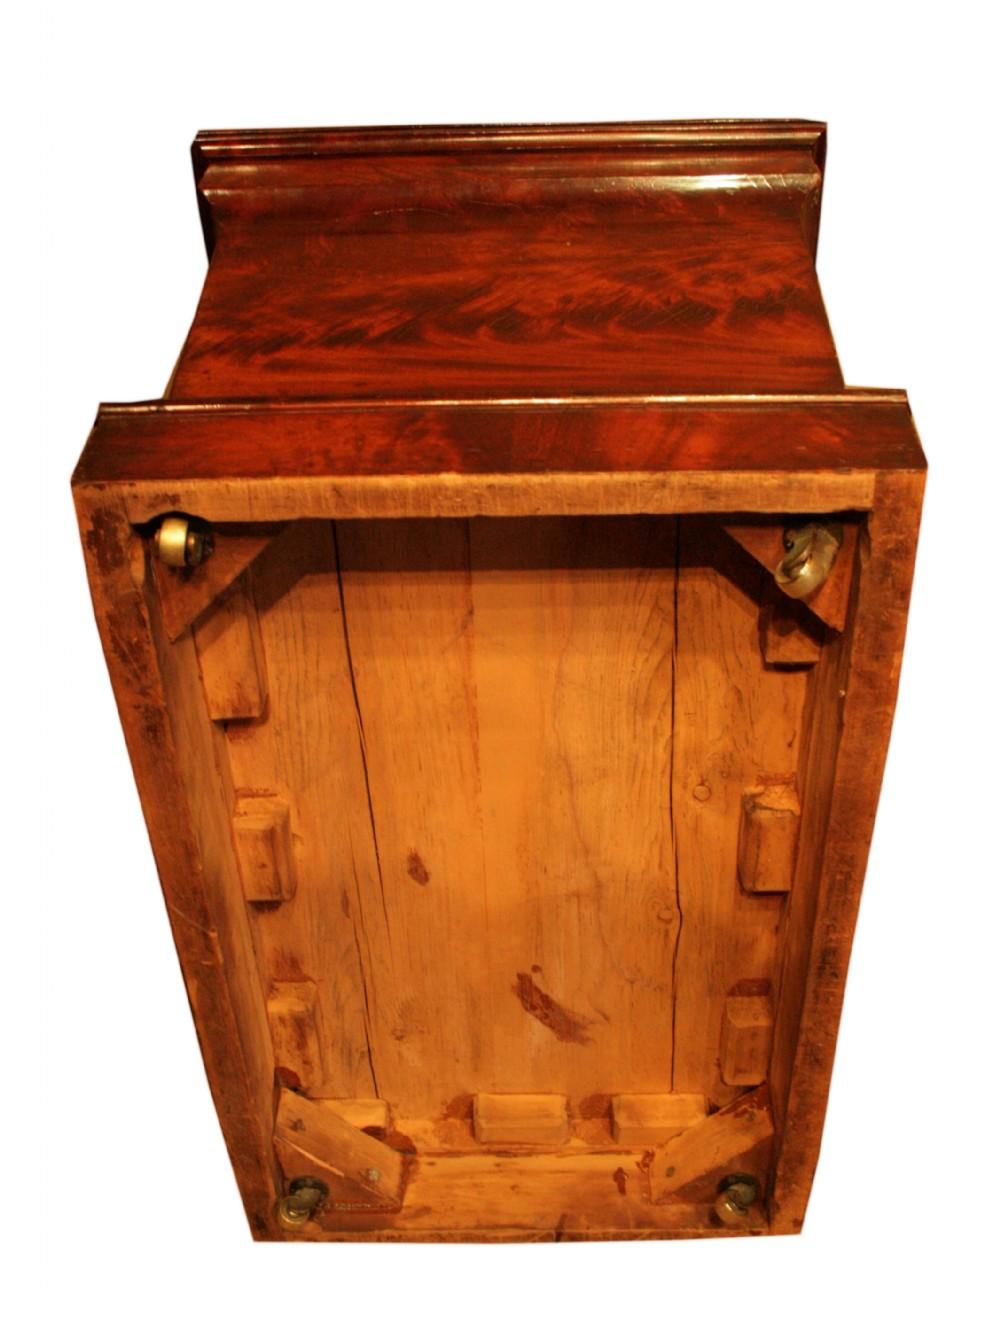 English Early 19th Century George III Flame Mahogany Sarcophagus Wine Cooler For Sale 1